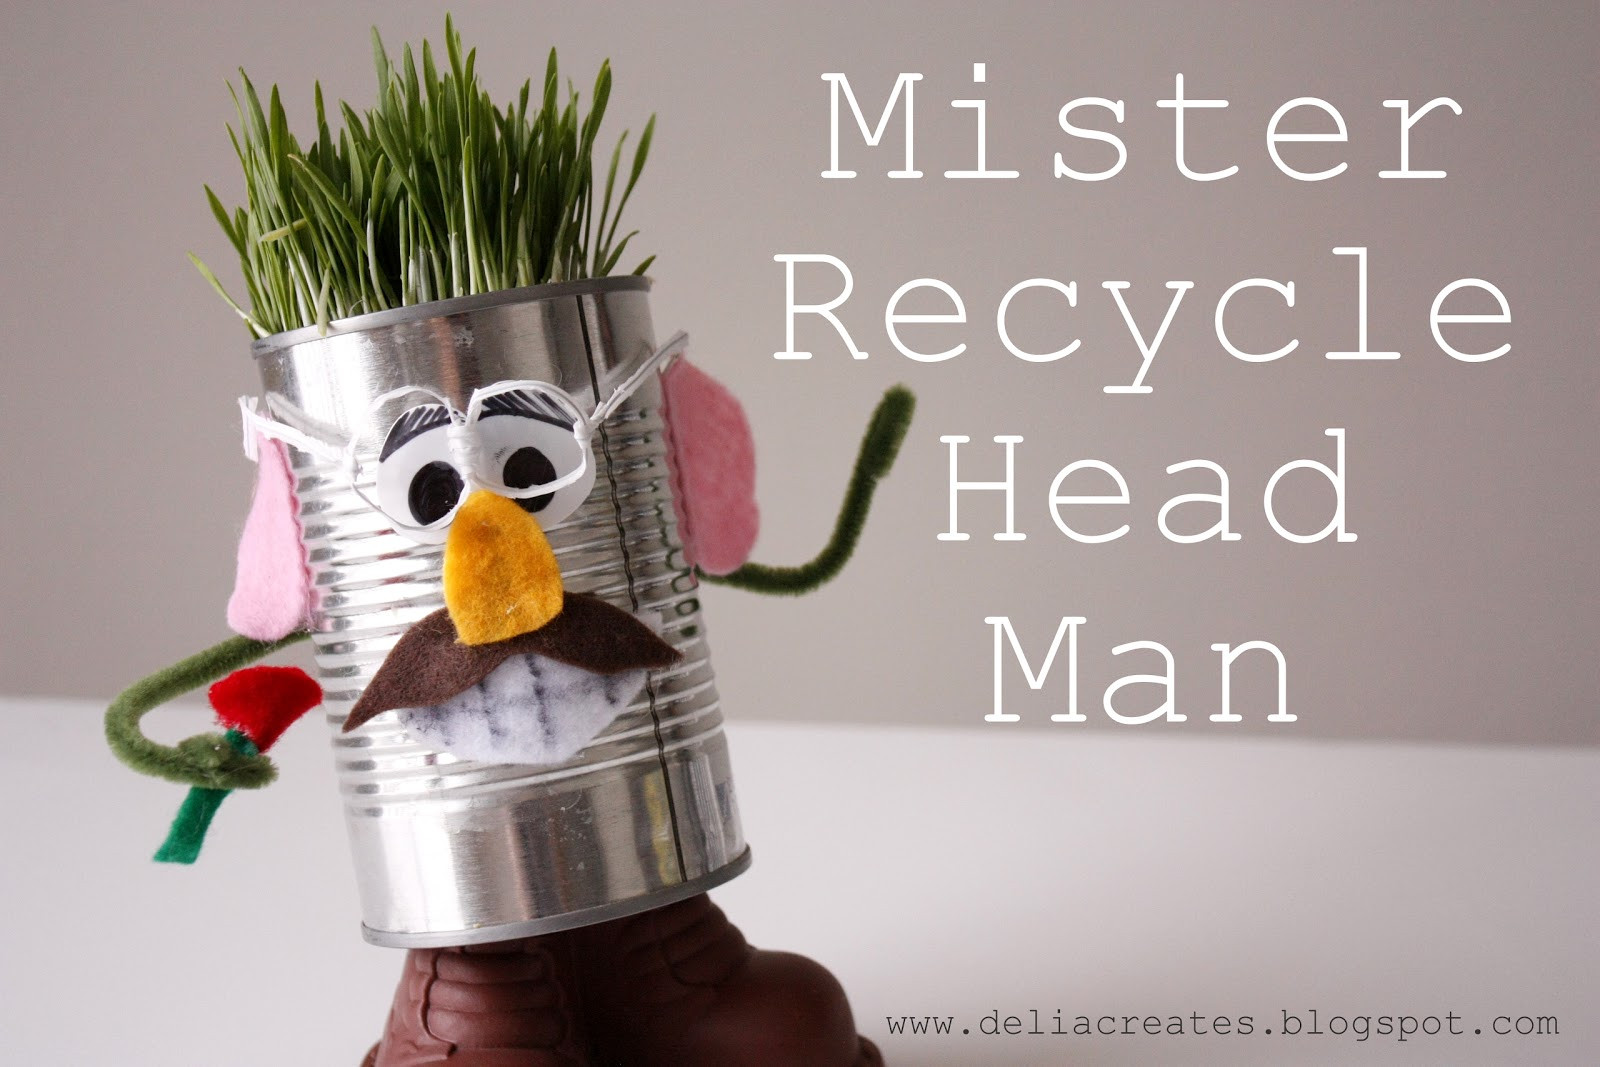 Recycling Craft For Preschoolers
 Preschool Crafts for Kids Earth Day Mister Recycle Head